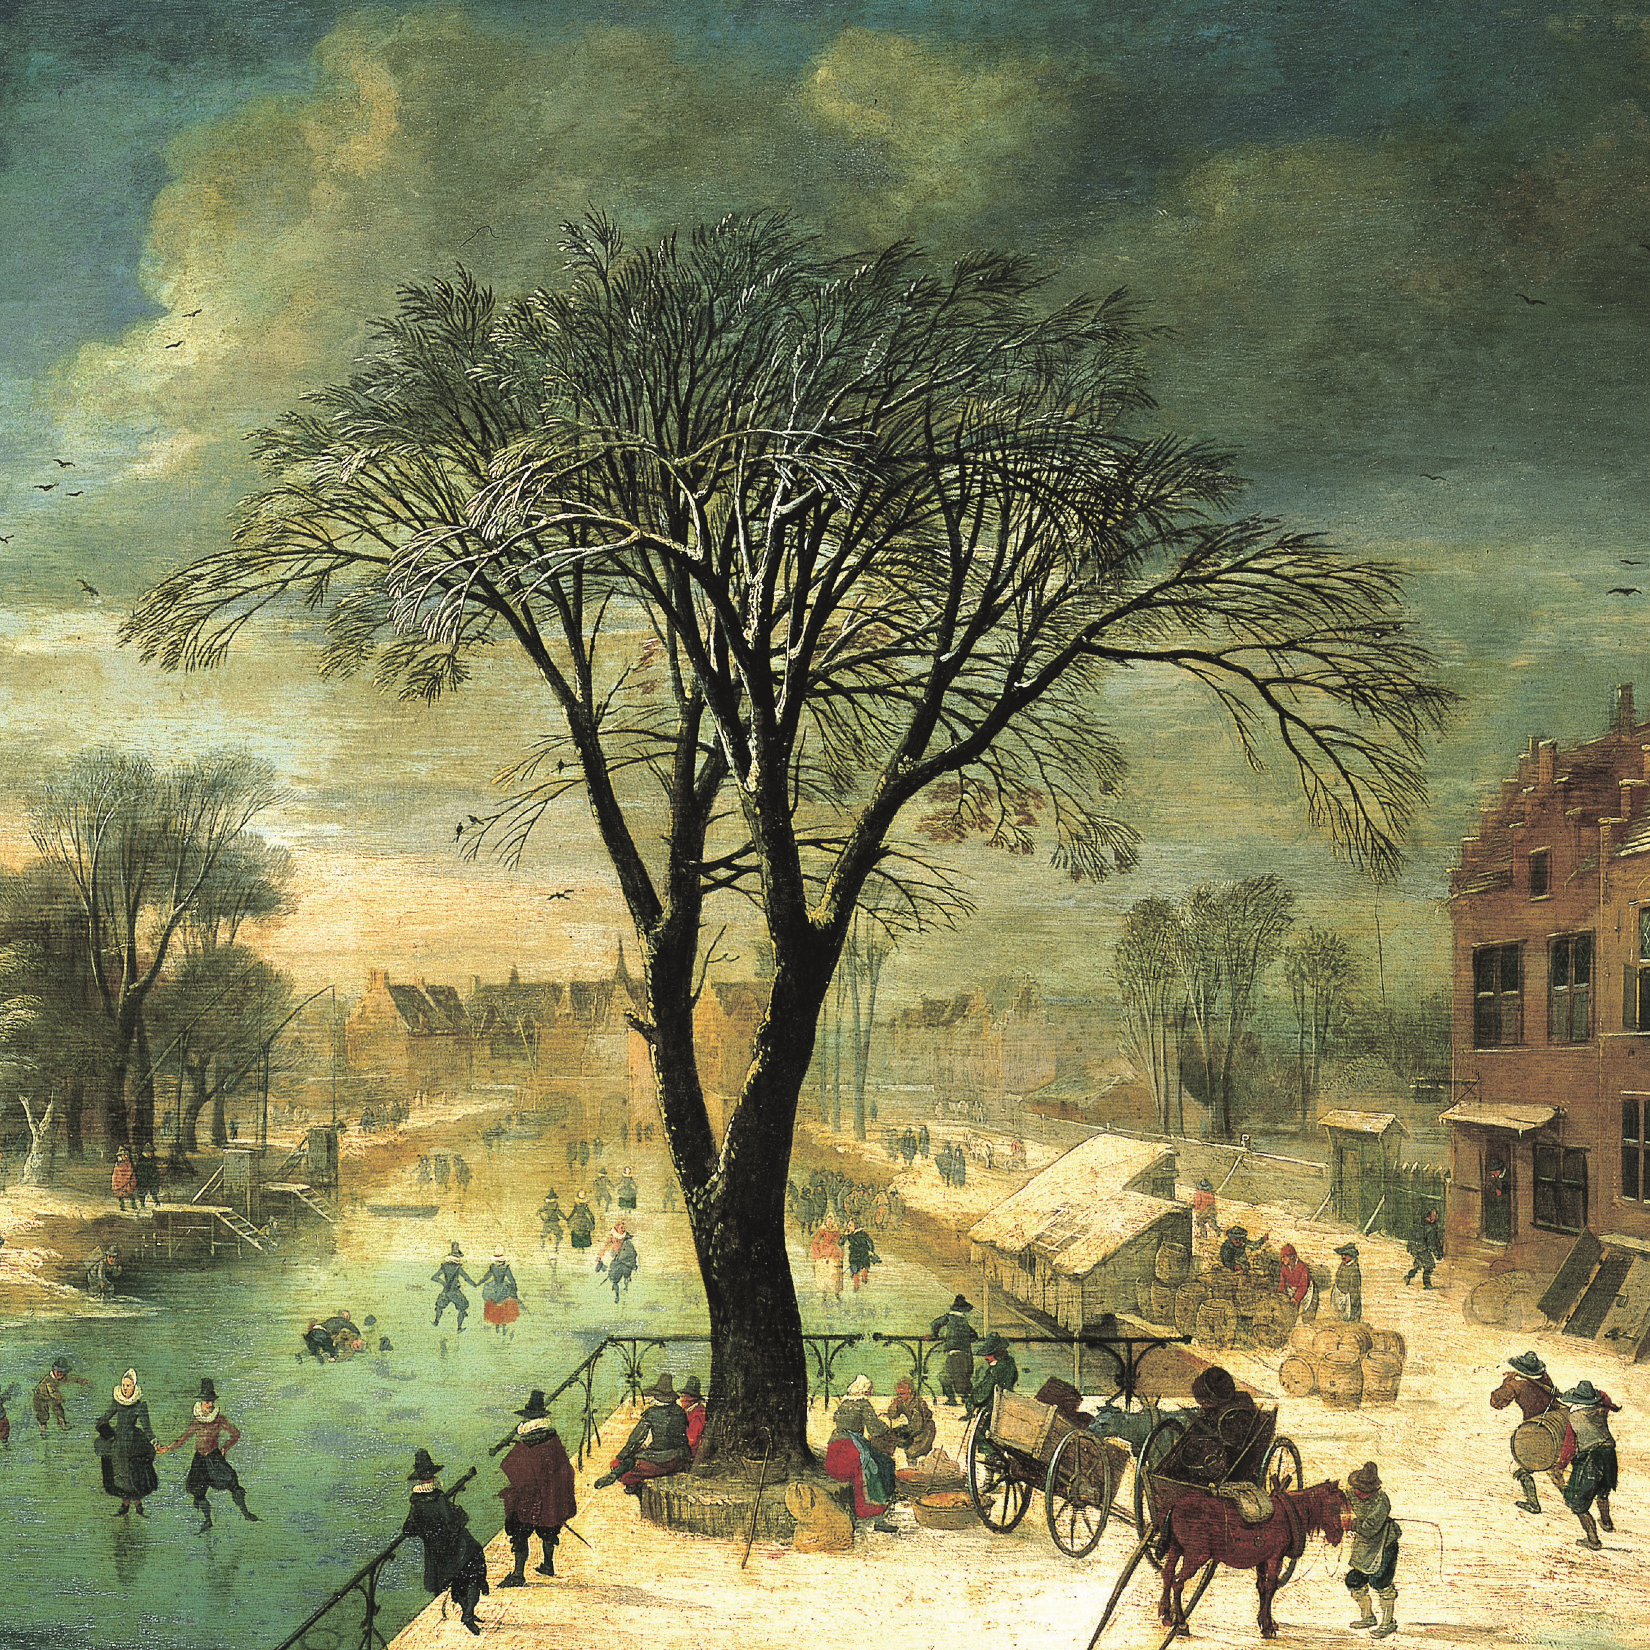 Square Christmas card - a central snowy tree in the middle of a Dutch city scene. Skaters on a frozen river to the left, a street with cards and pedestrians to the right. From the collection of The Fitzwilliam Museum, brought to you by CuratingCambridge.com